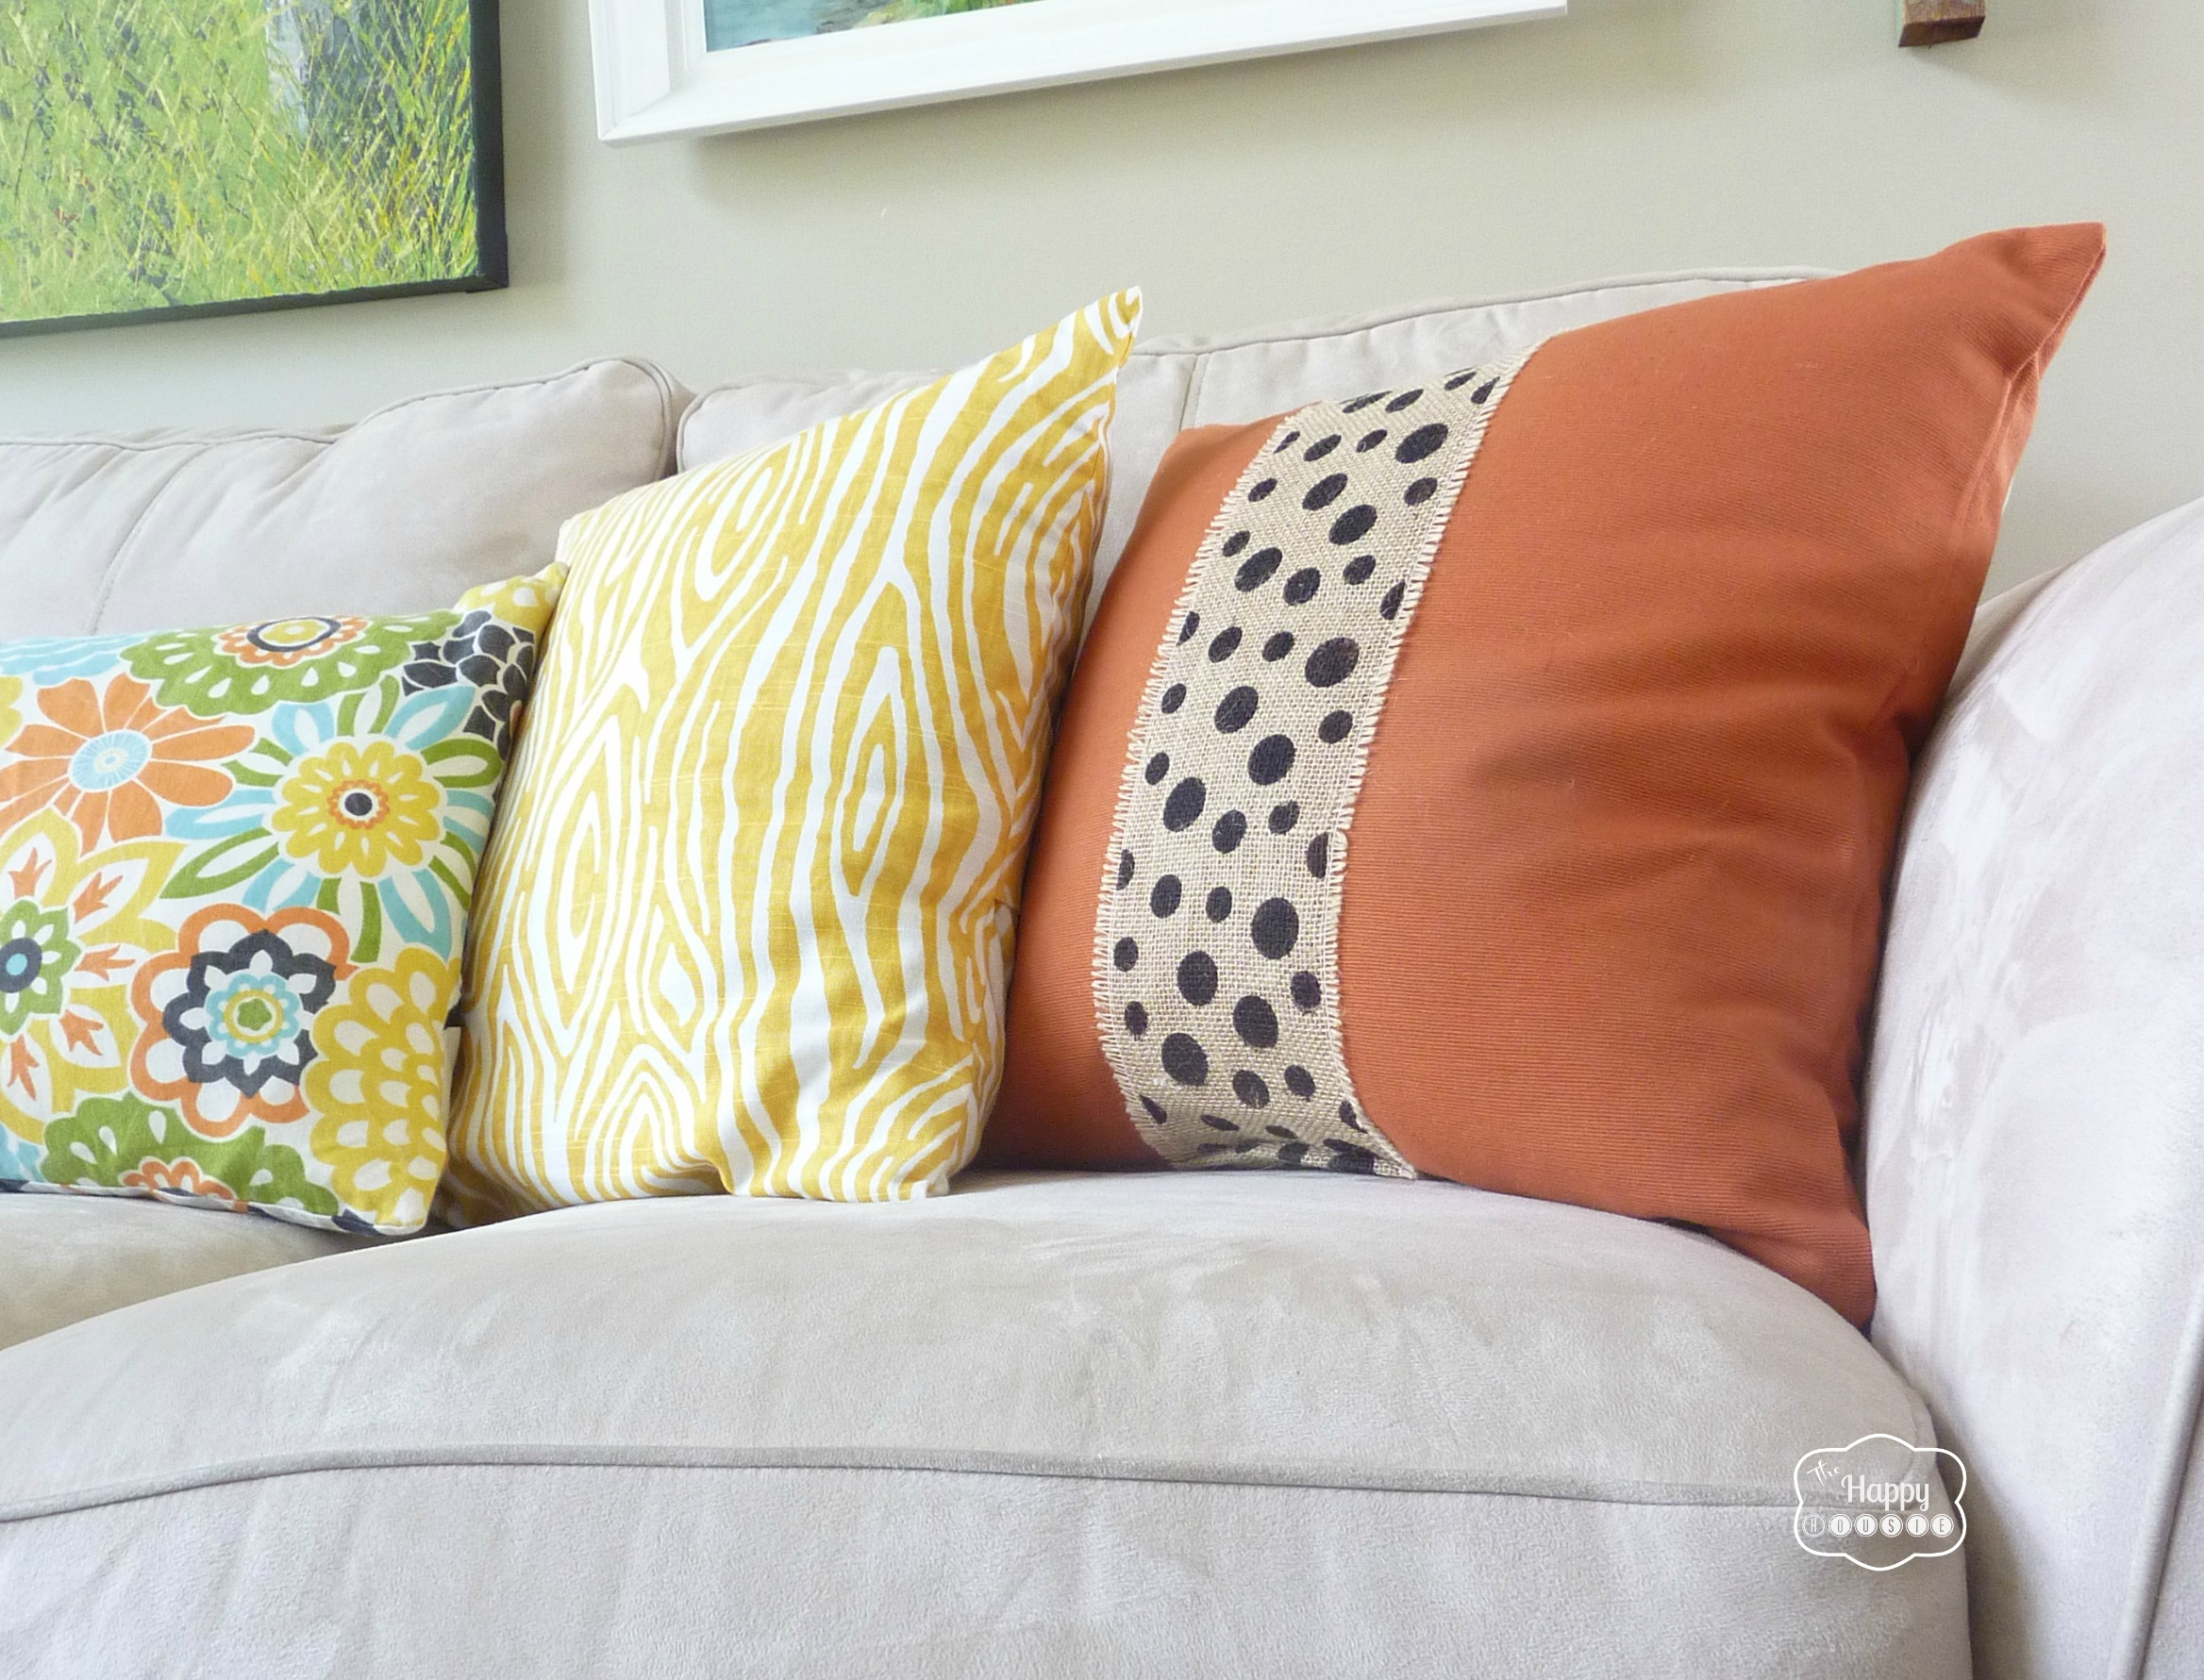 Two-Minute No-Sew Burlap Embellished Pillows for Fall